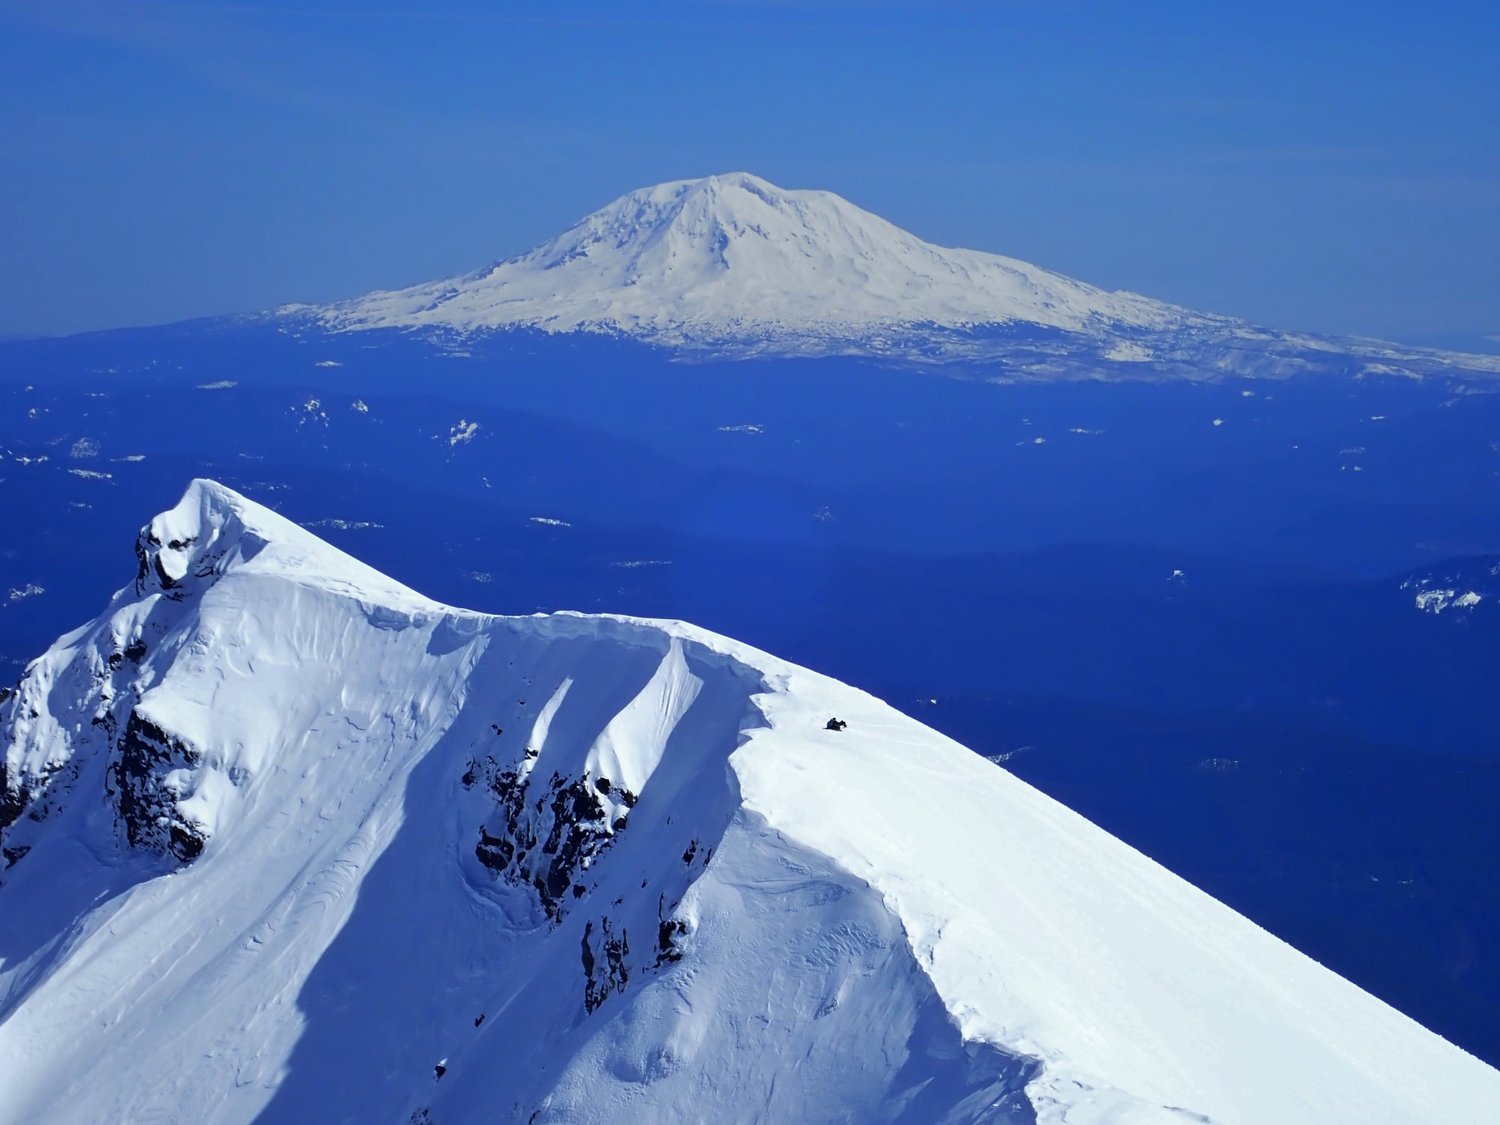 A view from the summit of Mount St. Helens.